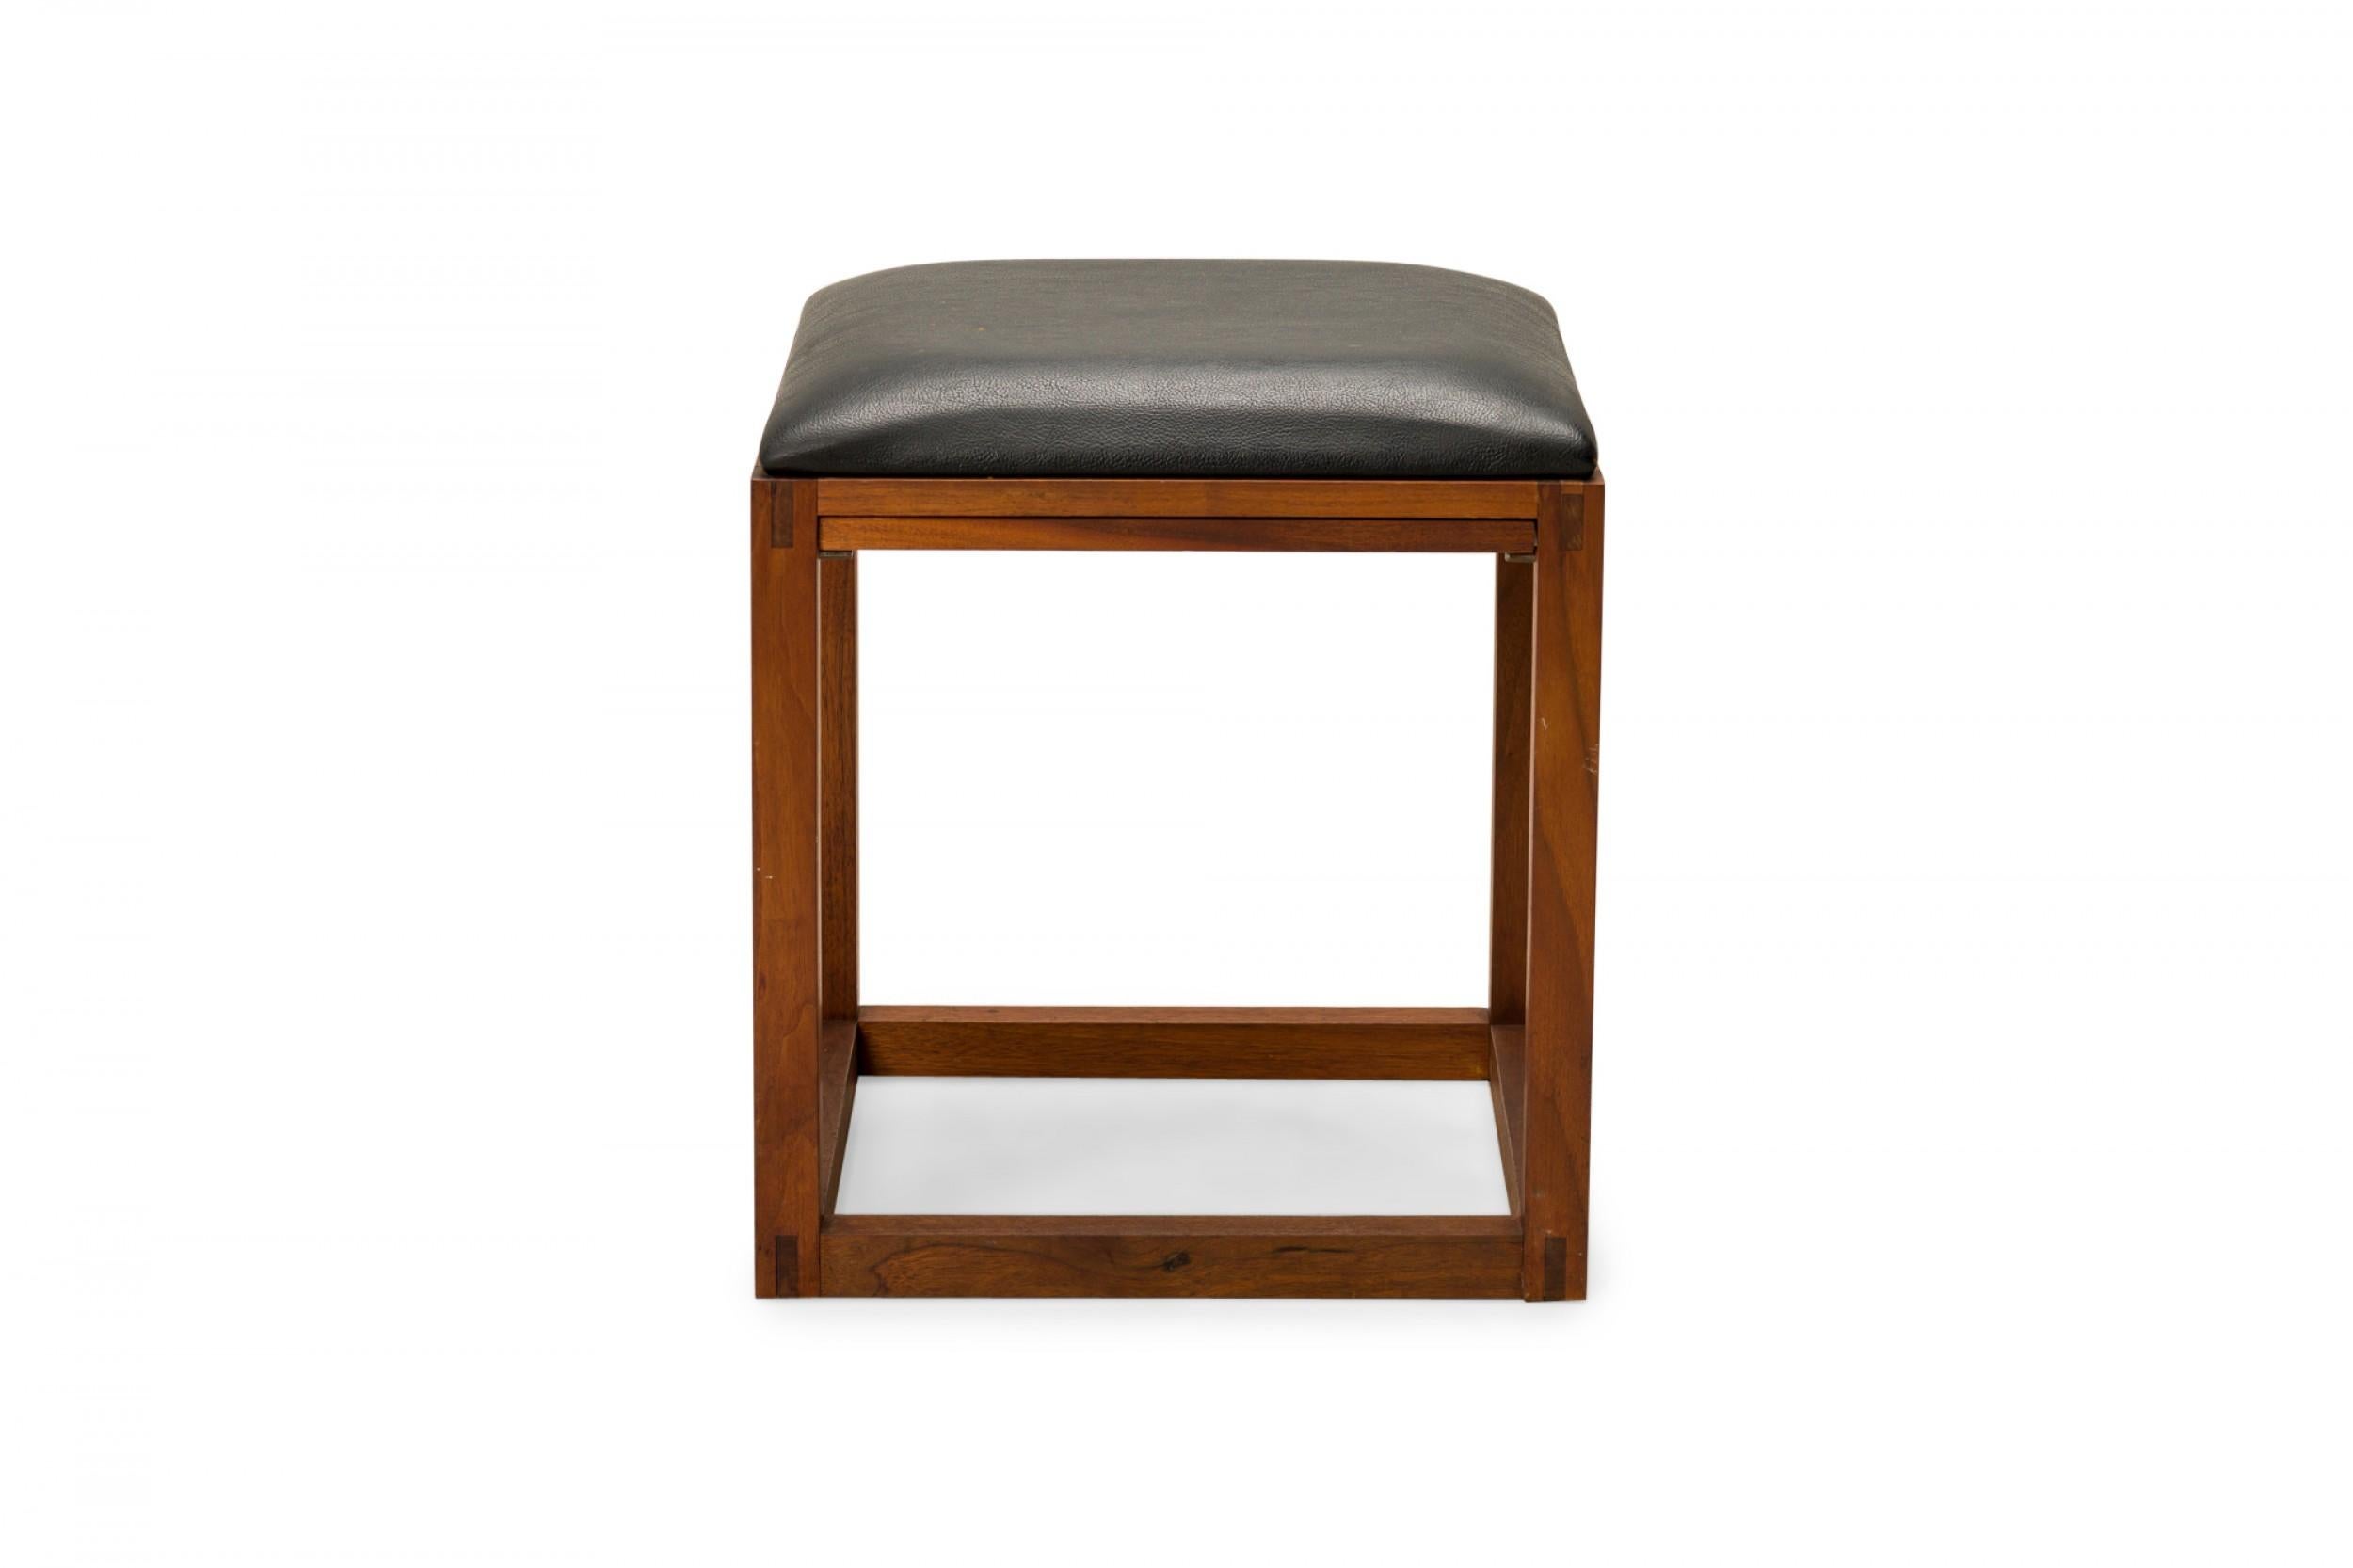 Pair of American mid-century stools with wooden cube frames concealing slide out trays beneath black leather upholstered seats. (TONY PAUL)(PRICED AS PAIR)(Available in gray: DUF0577)
 